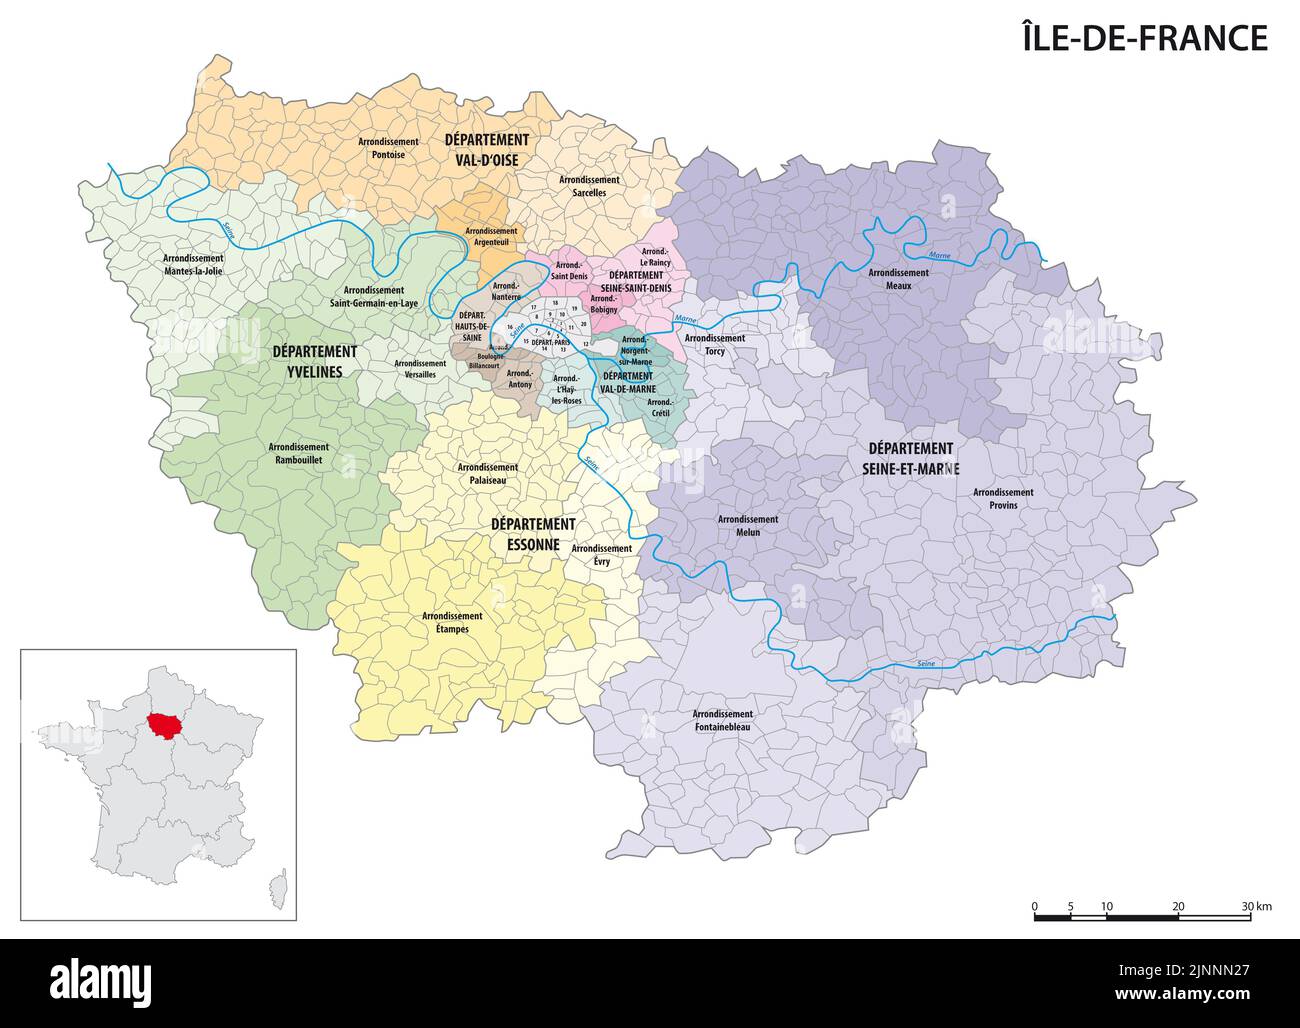 Detailed administrative map of the Ile-de-France region, France Stock Photo